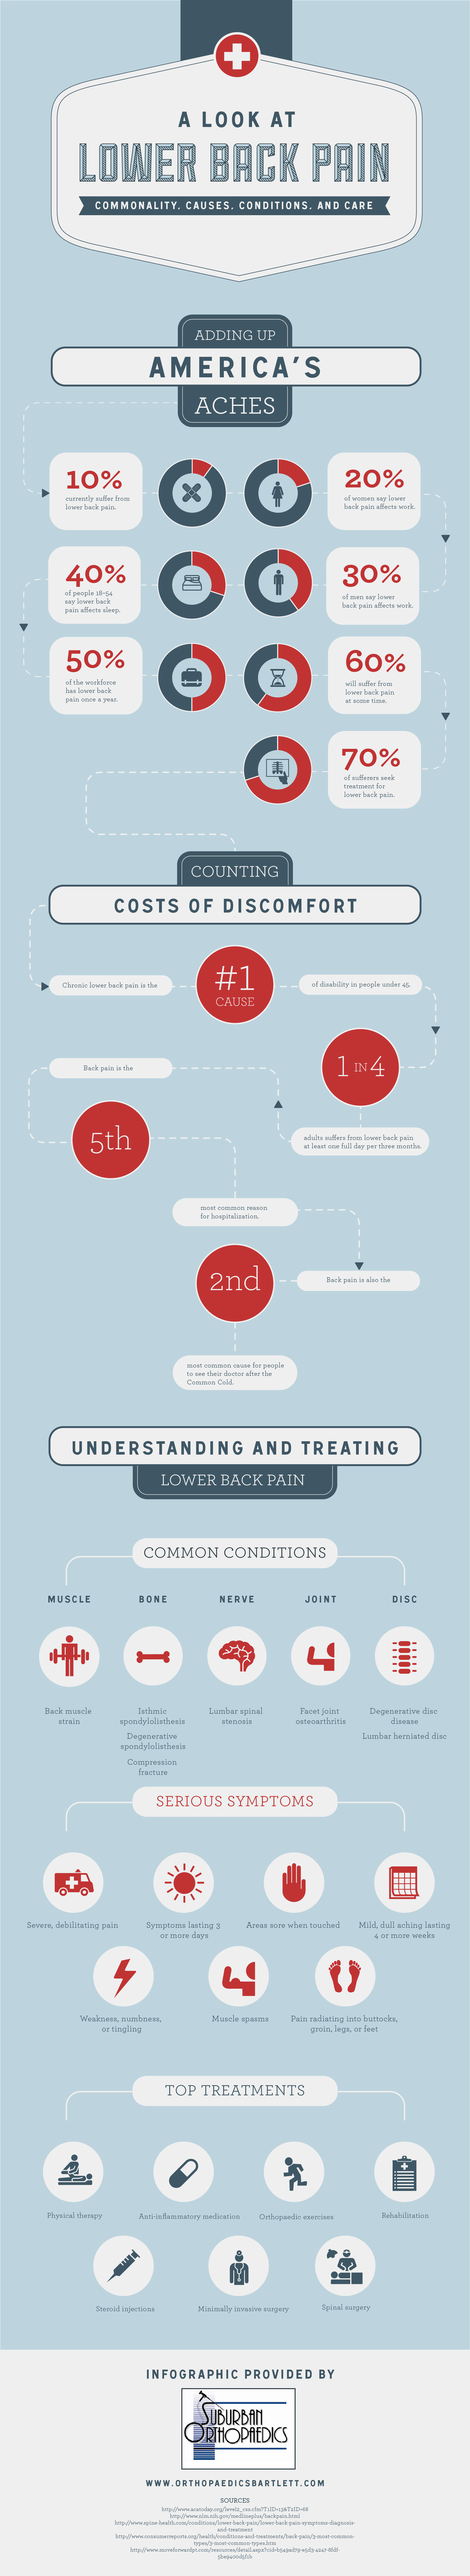 A Look at Lower Back Pain